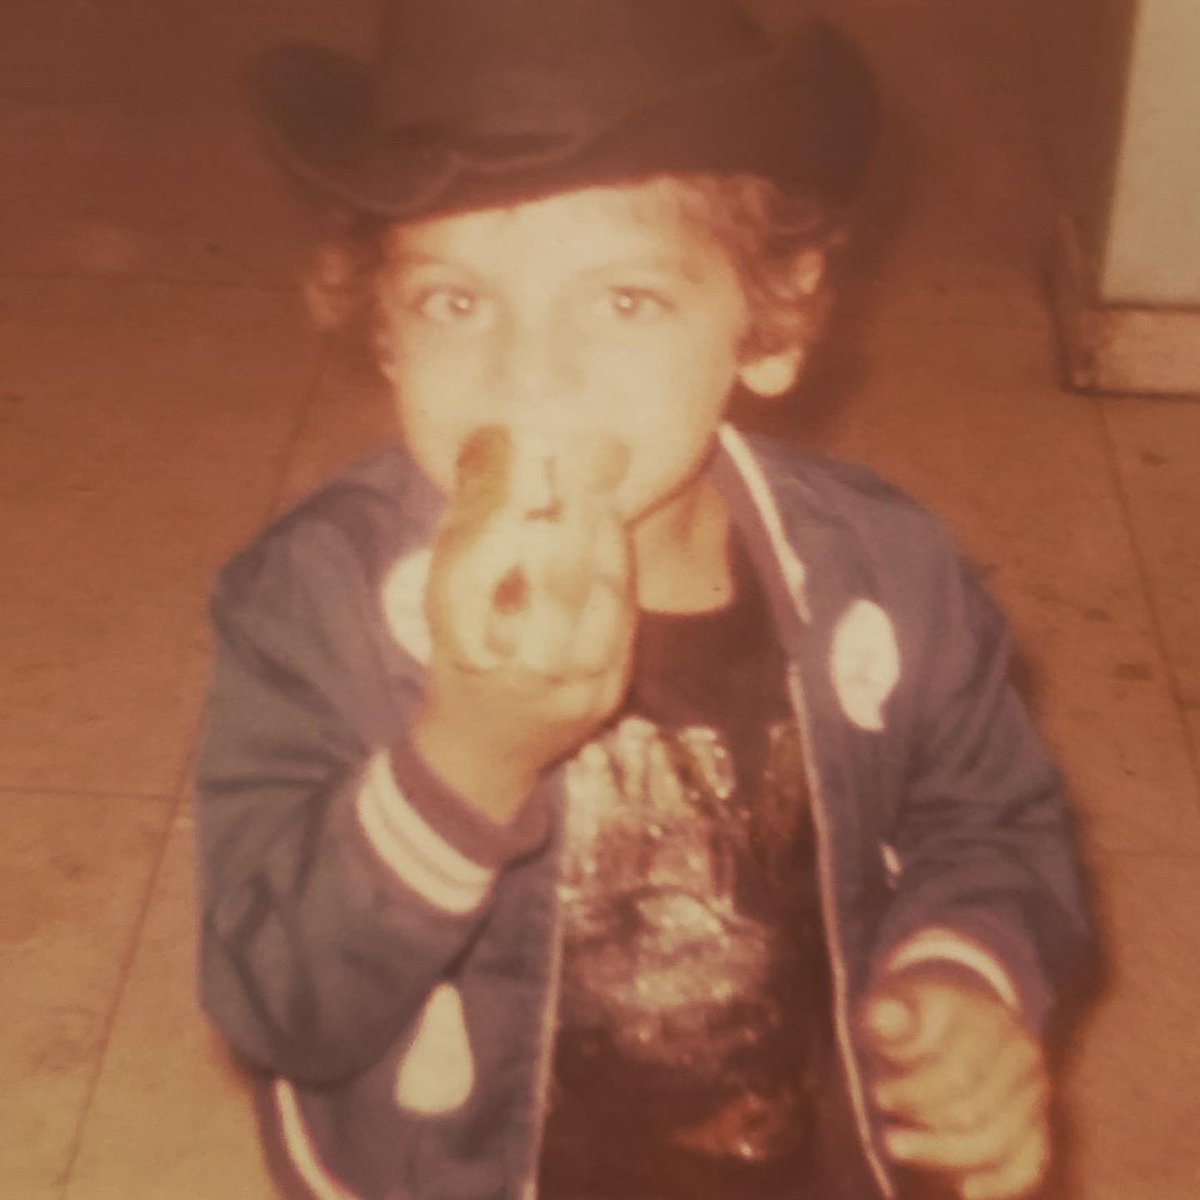 Little Sheik, 1977 at the West Palm Beach Auditorium for Monday Night Wrestling...eating a hot dog, wearing a cowboy hat, waiting for Dusty Rhodes to beat the holy hell out of Bad Bad Leroy Brown! Whenever I promote a wrestling show, I'm booking it for this little guy.